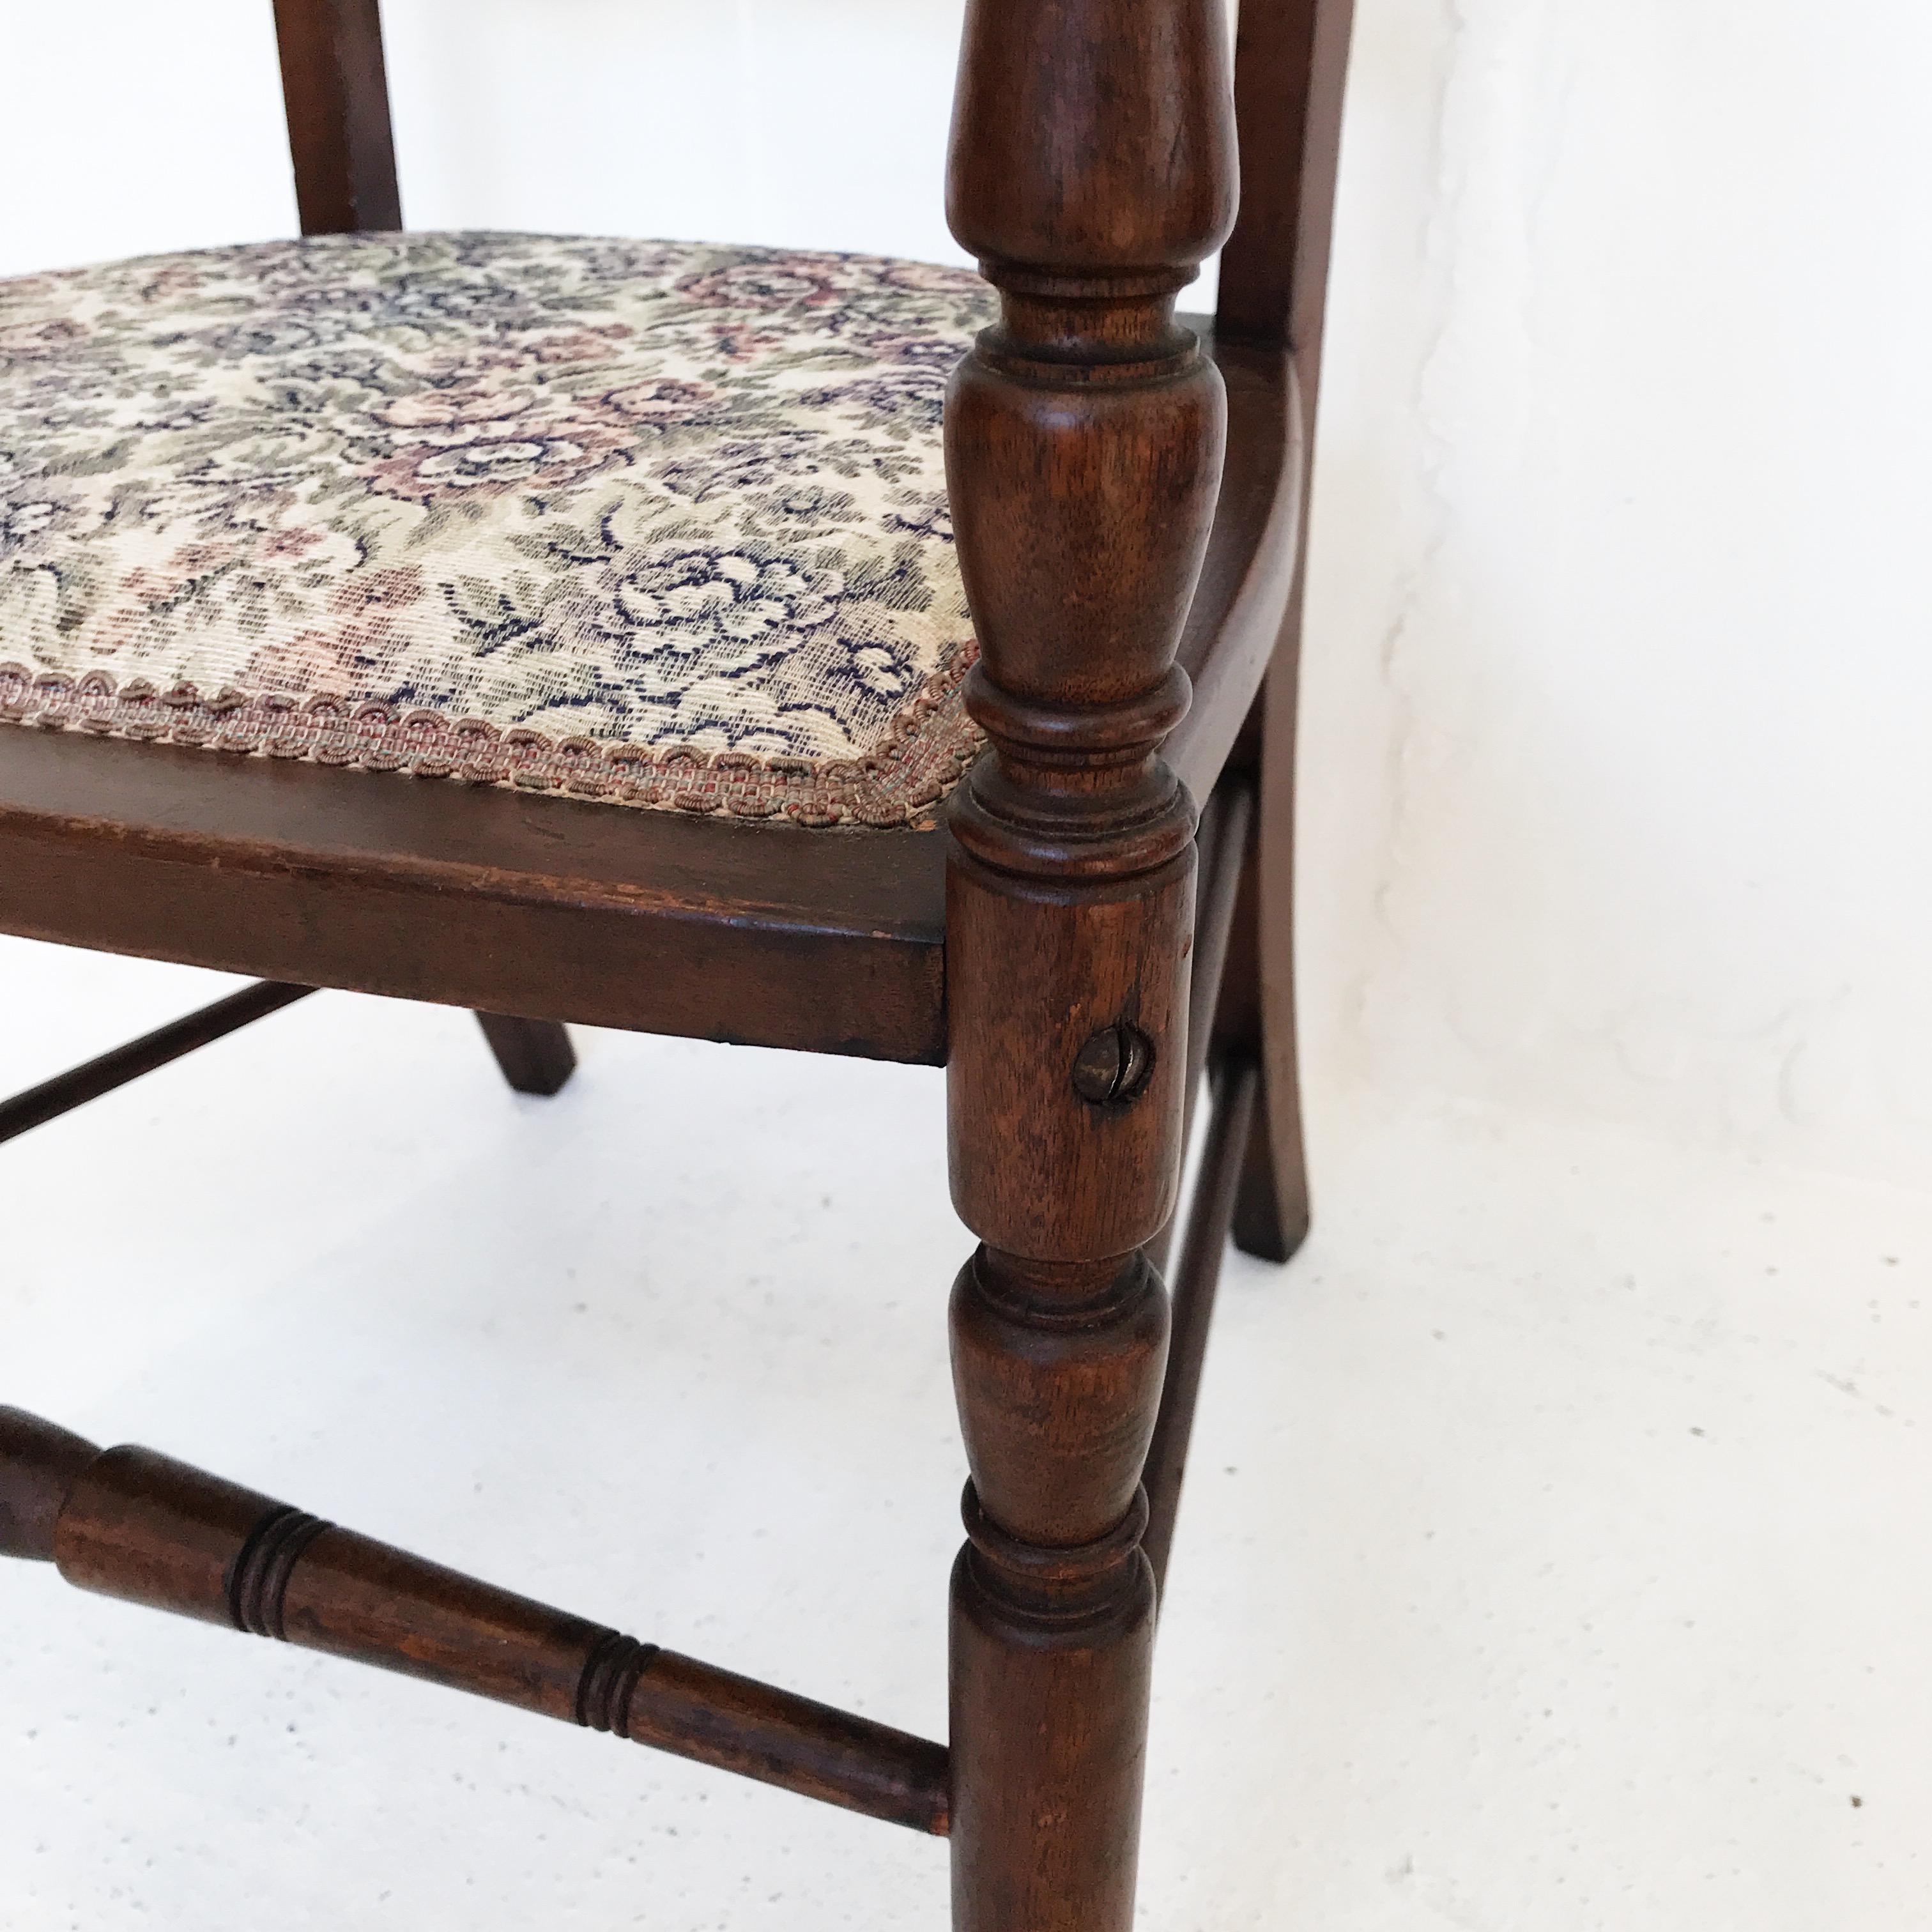 Early 20th Century Early-20th Century Ladder Back Chair by Beard Watson Limited, Sydney, Australia For Sale